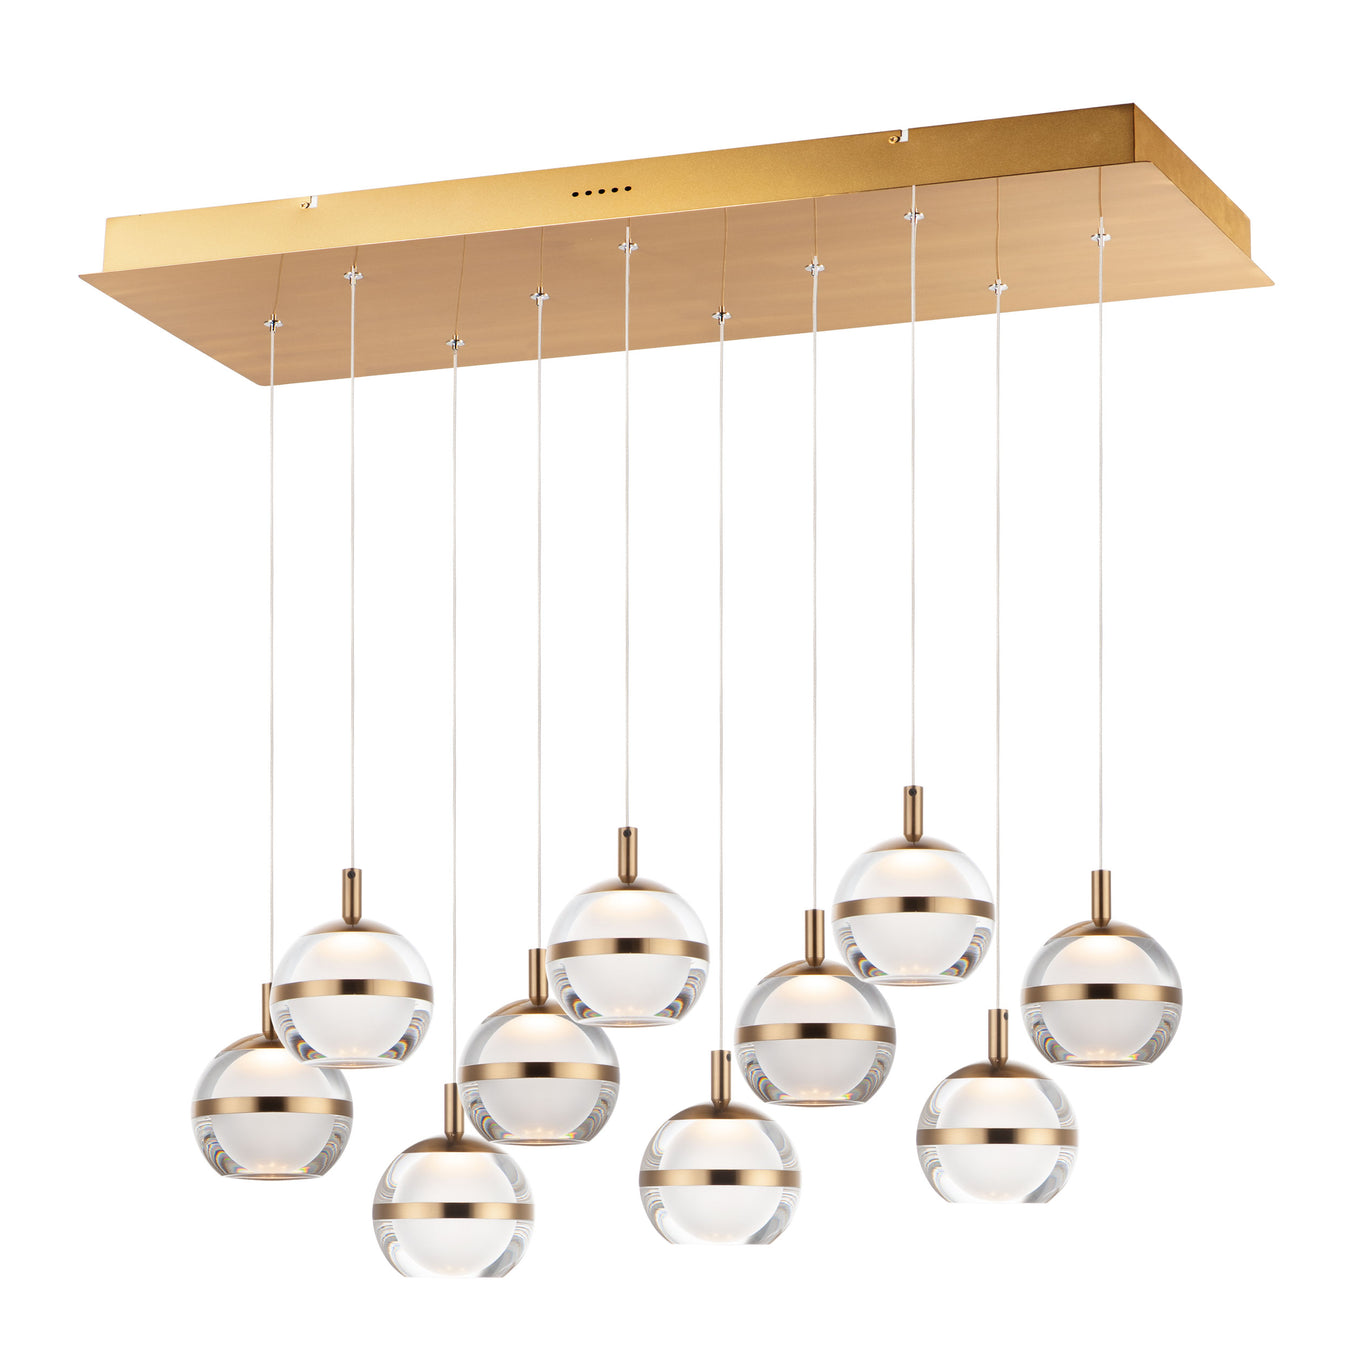 Swank LED 10-Light Linear Pendant in Natural Aged Brass